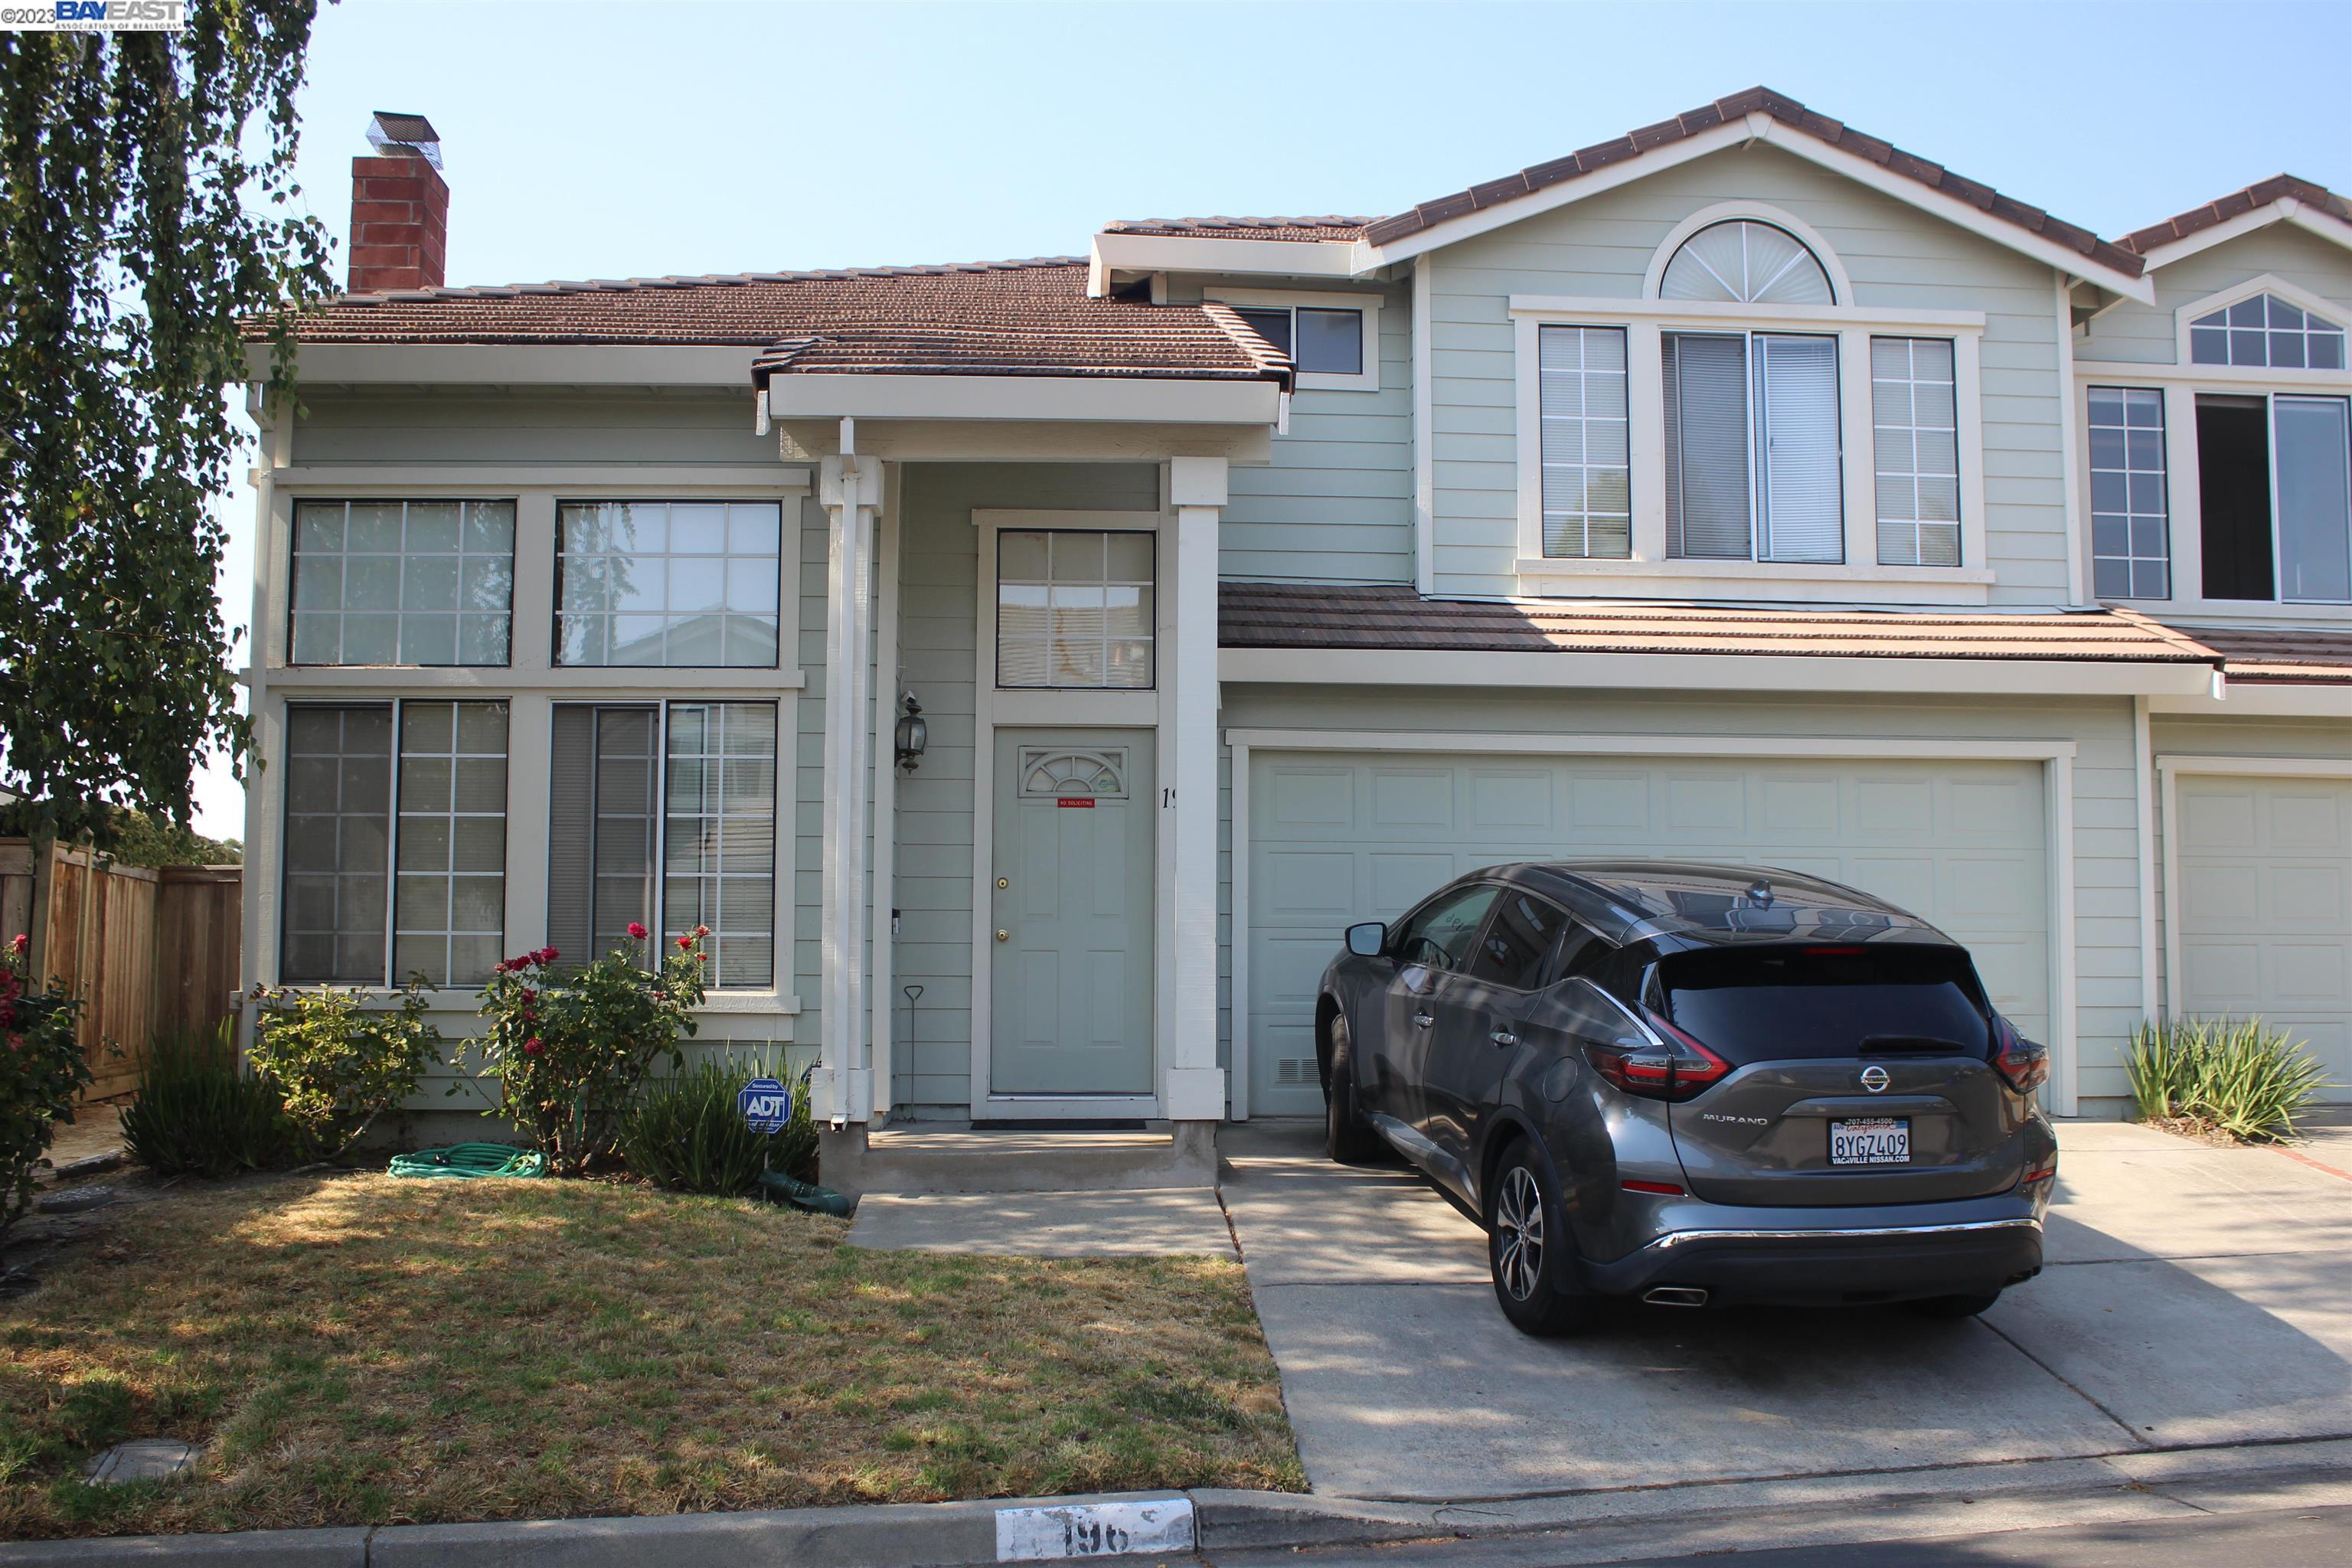 a view of a car parked front of a house